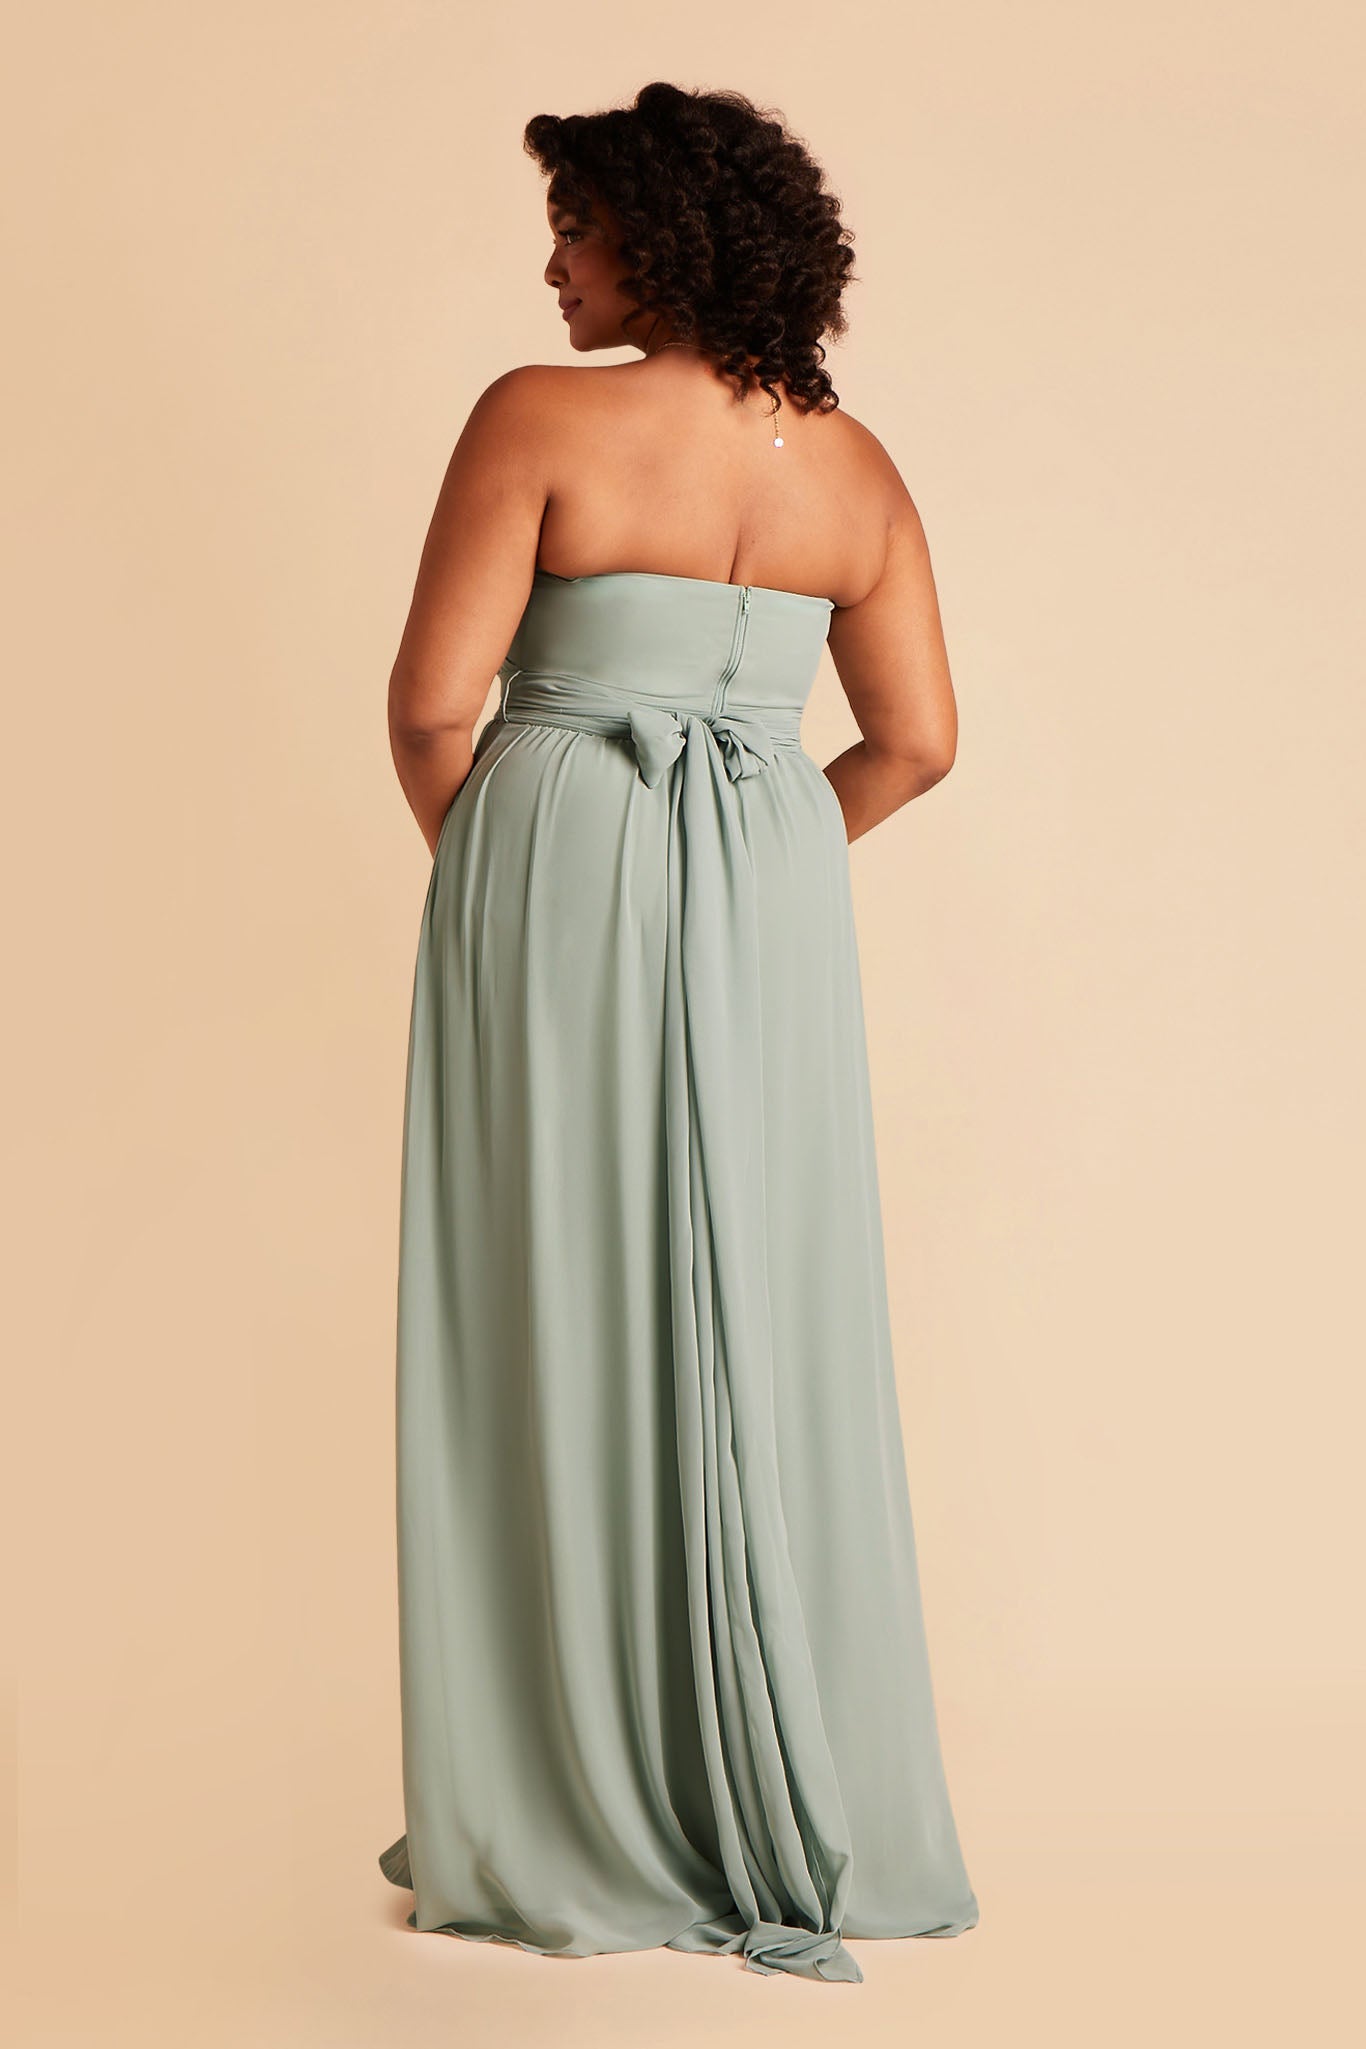 Back view of the Grace Convertible Plus Size Bridesmaid Dress in sage chiffon reveals an open back cut below the shoulder blades with front streamers tied around the waist in a delicate and flowing bow.